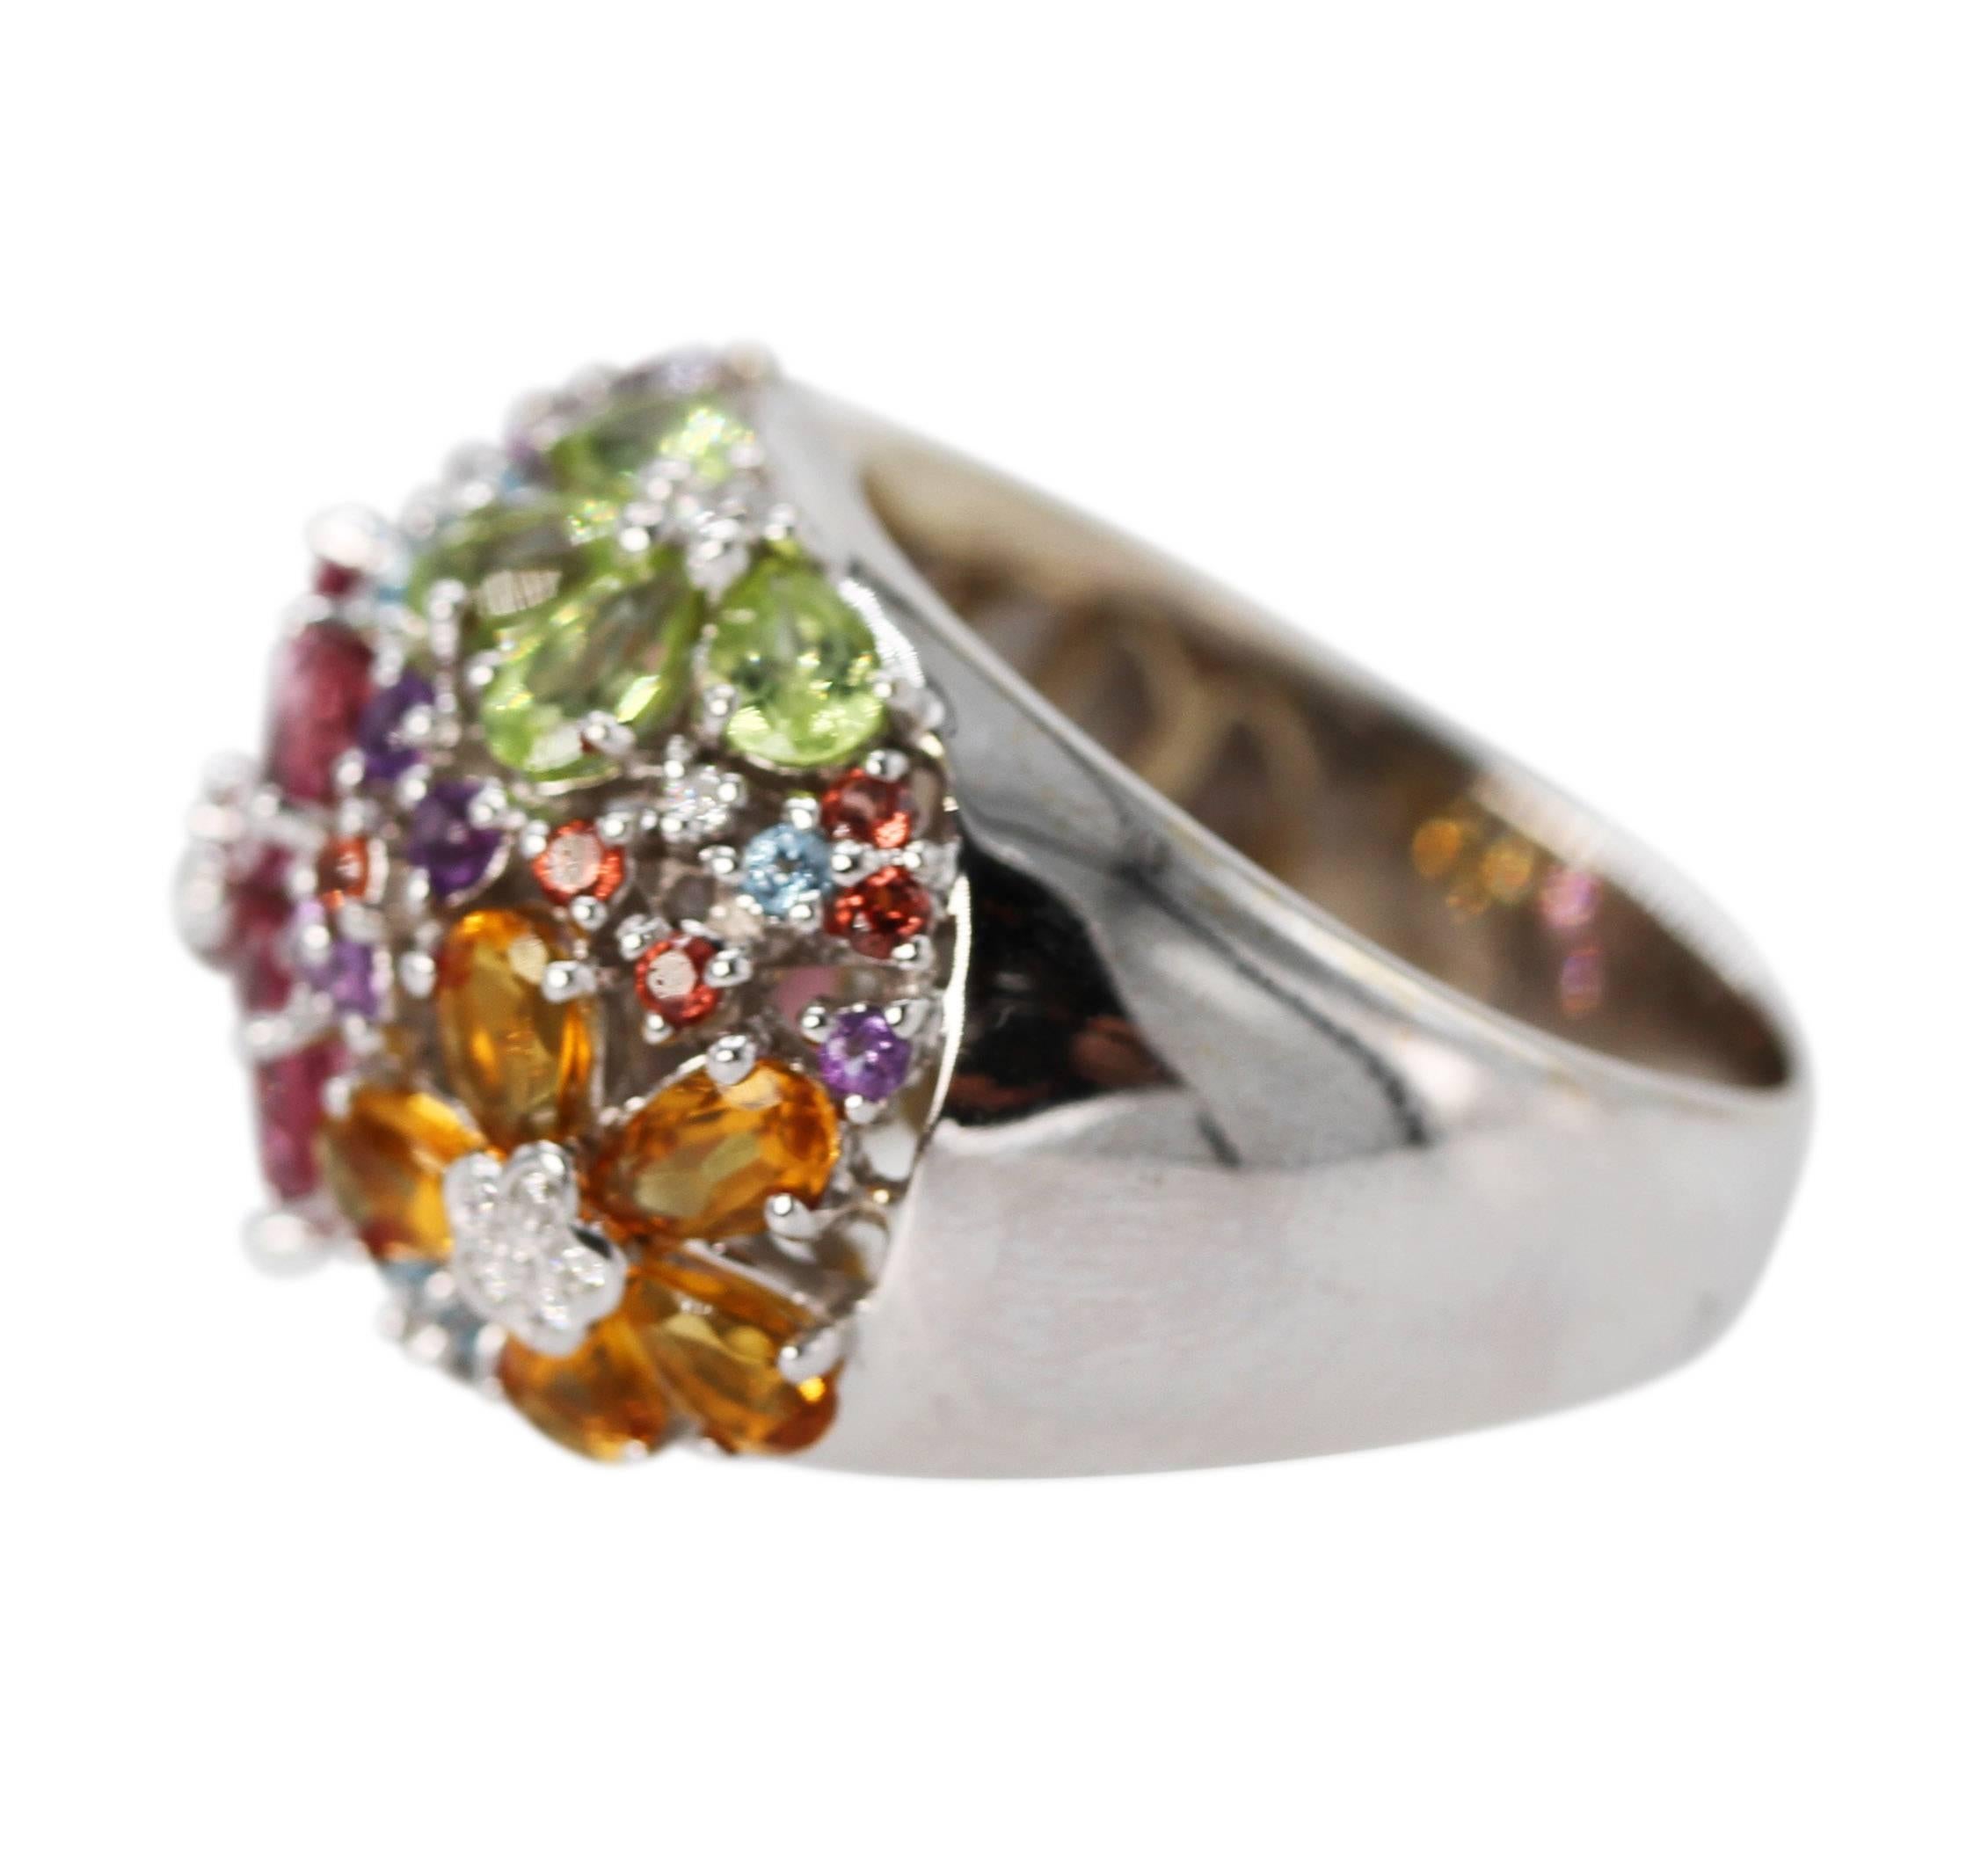 18 Karat White Gold, Multi-Colored Gem and Diamond Ring
• Marked 18k 750 with makers mark
• 5 pear shape-shaped citrines, 5 blue topaz, 5 pink tourmalines, and 4 pear-shaped peridots
• 14 round amethysts, 10 round citrines, 9 round blue topaz
• 26